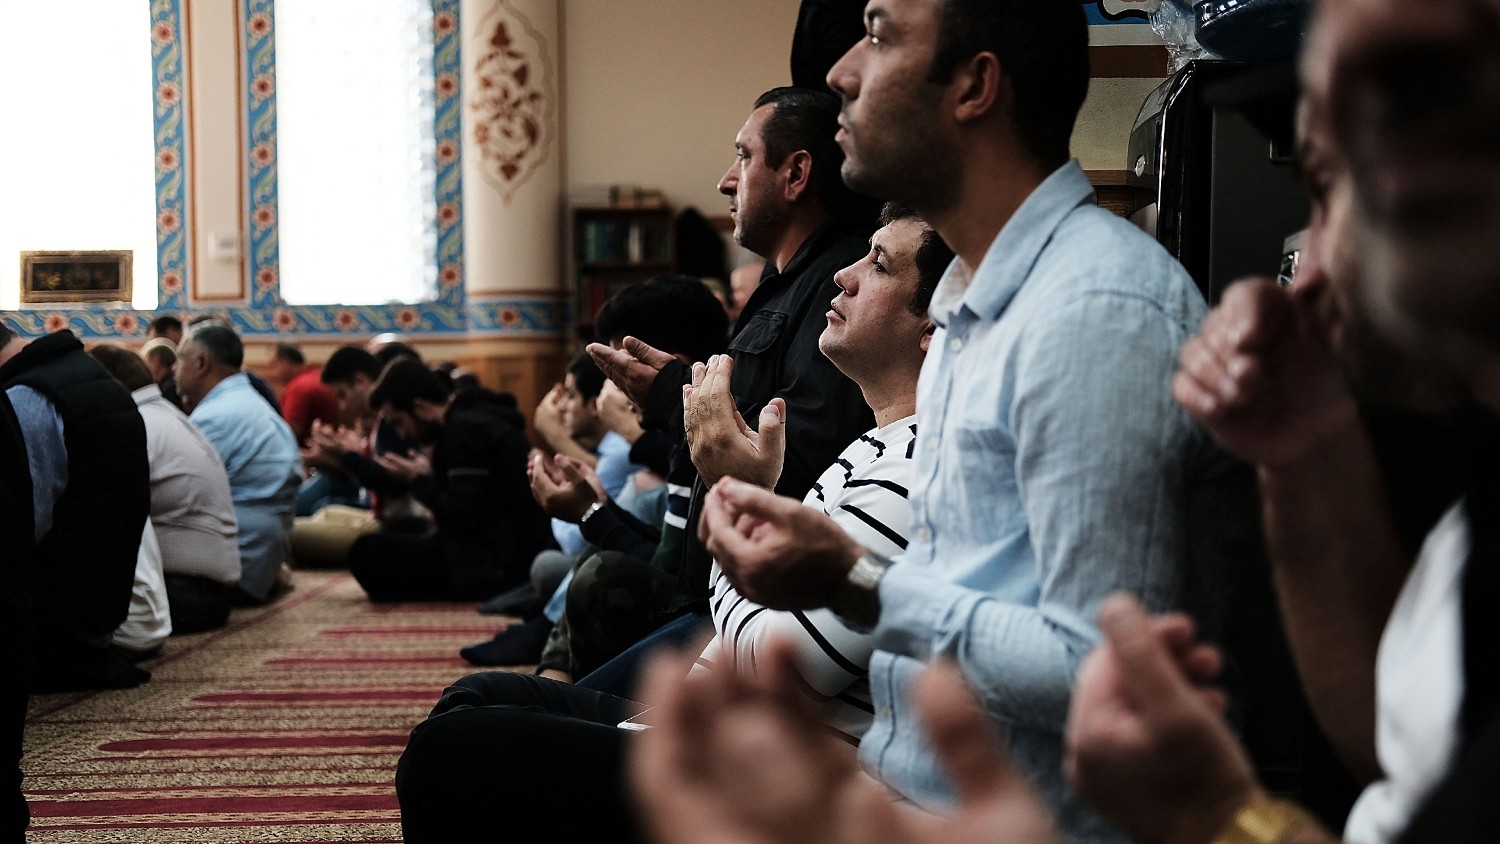 Men pray in the Eyup Cultural Center mosque on 3 November 2017 in New York City.